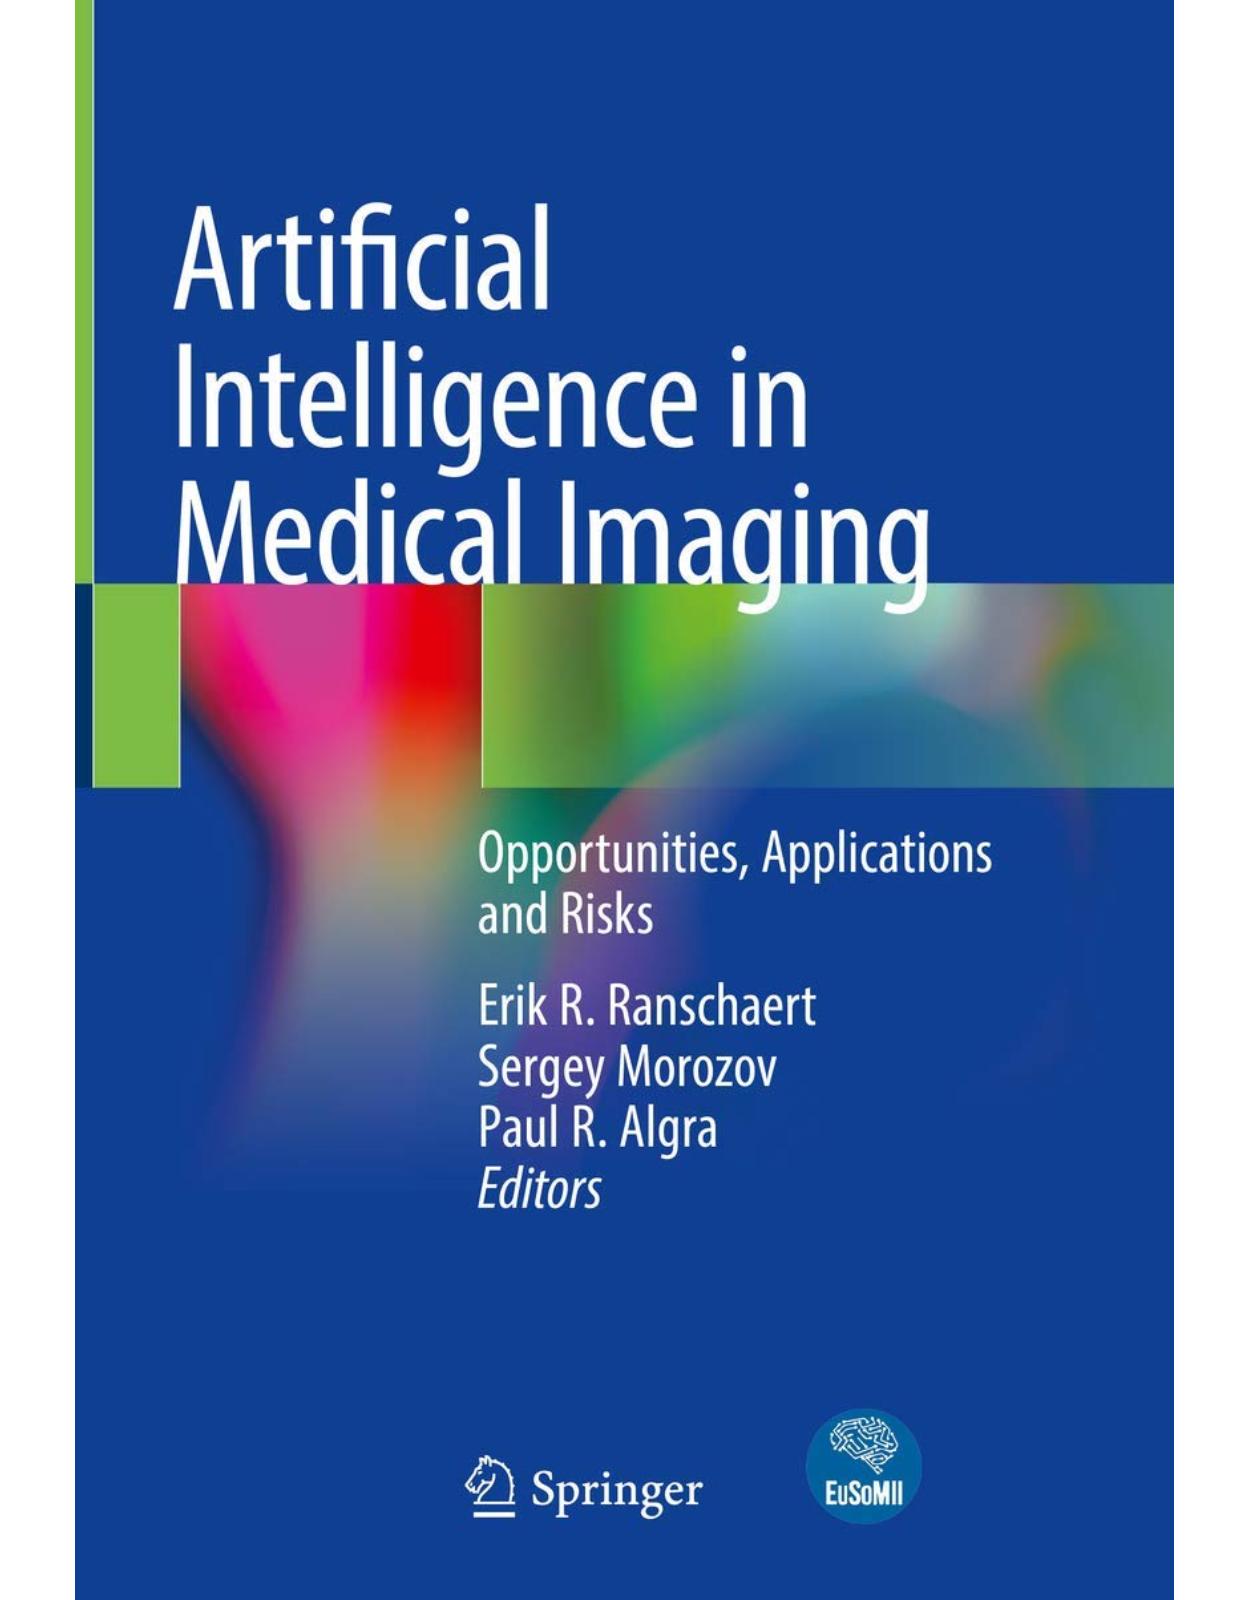 Artificial Intelligence in Medical Imaging: Opportunities, Applications and Risks